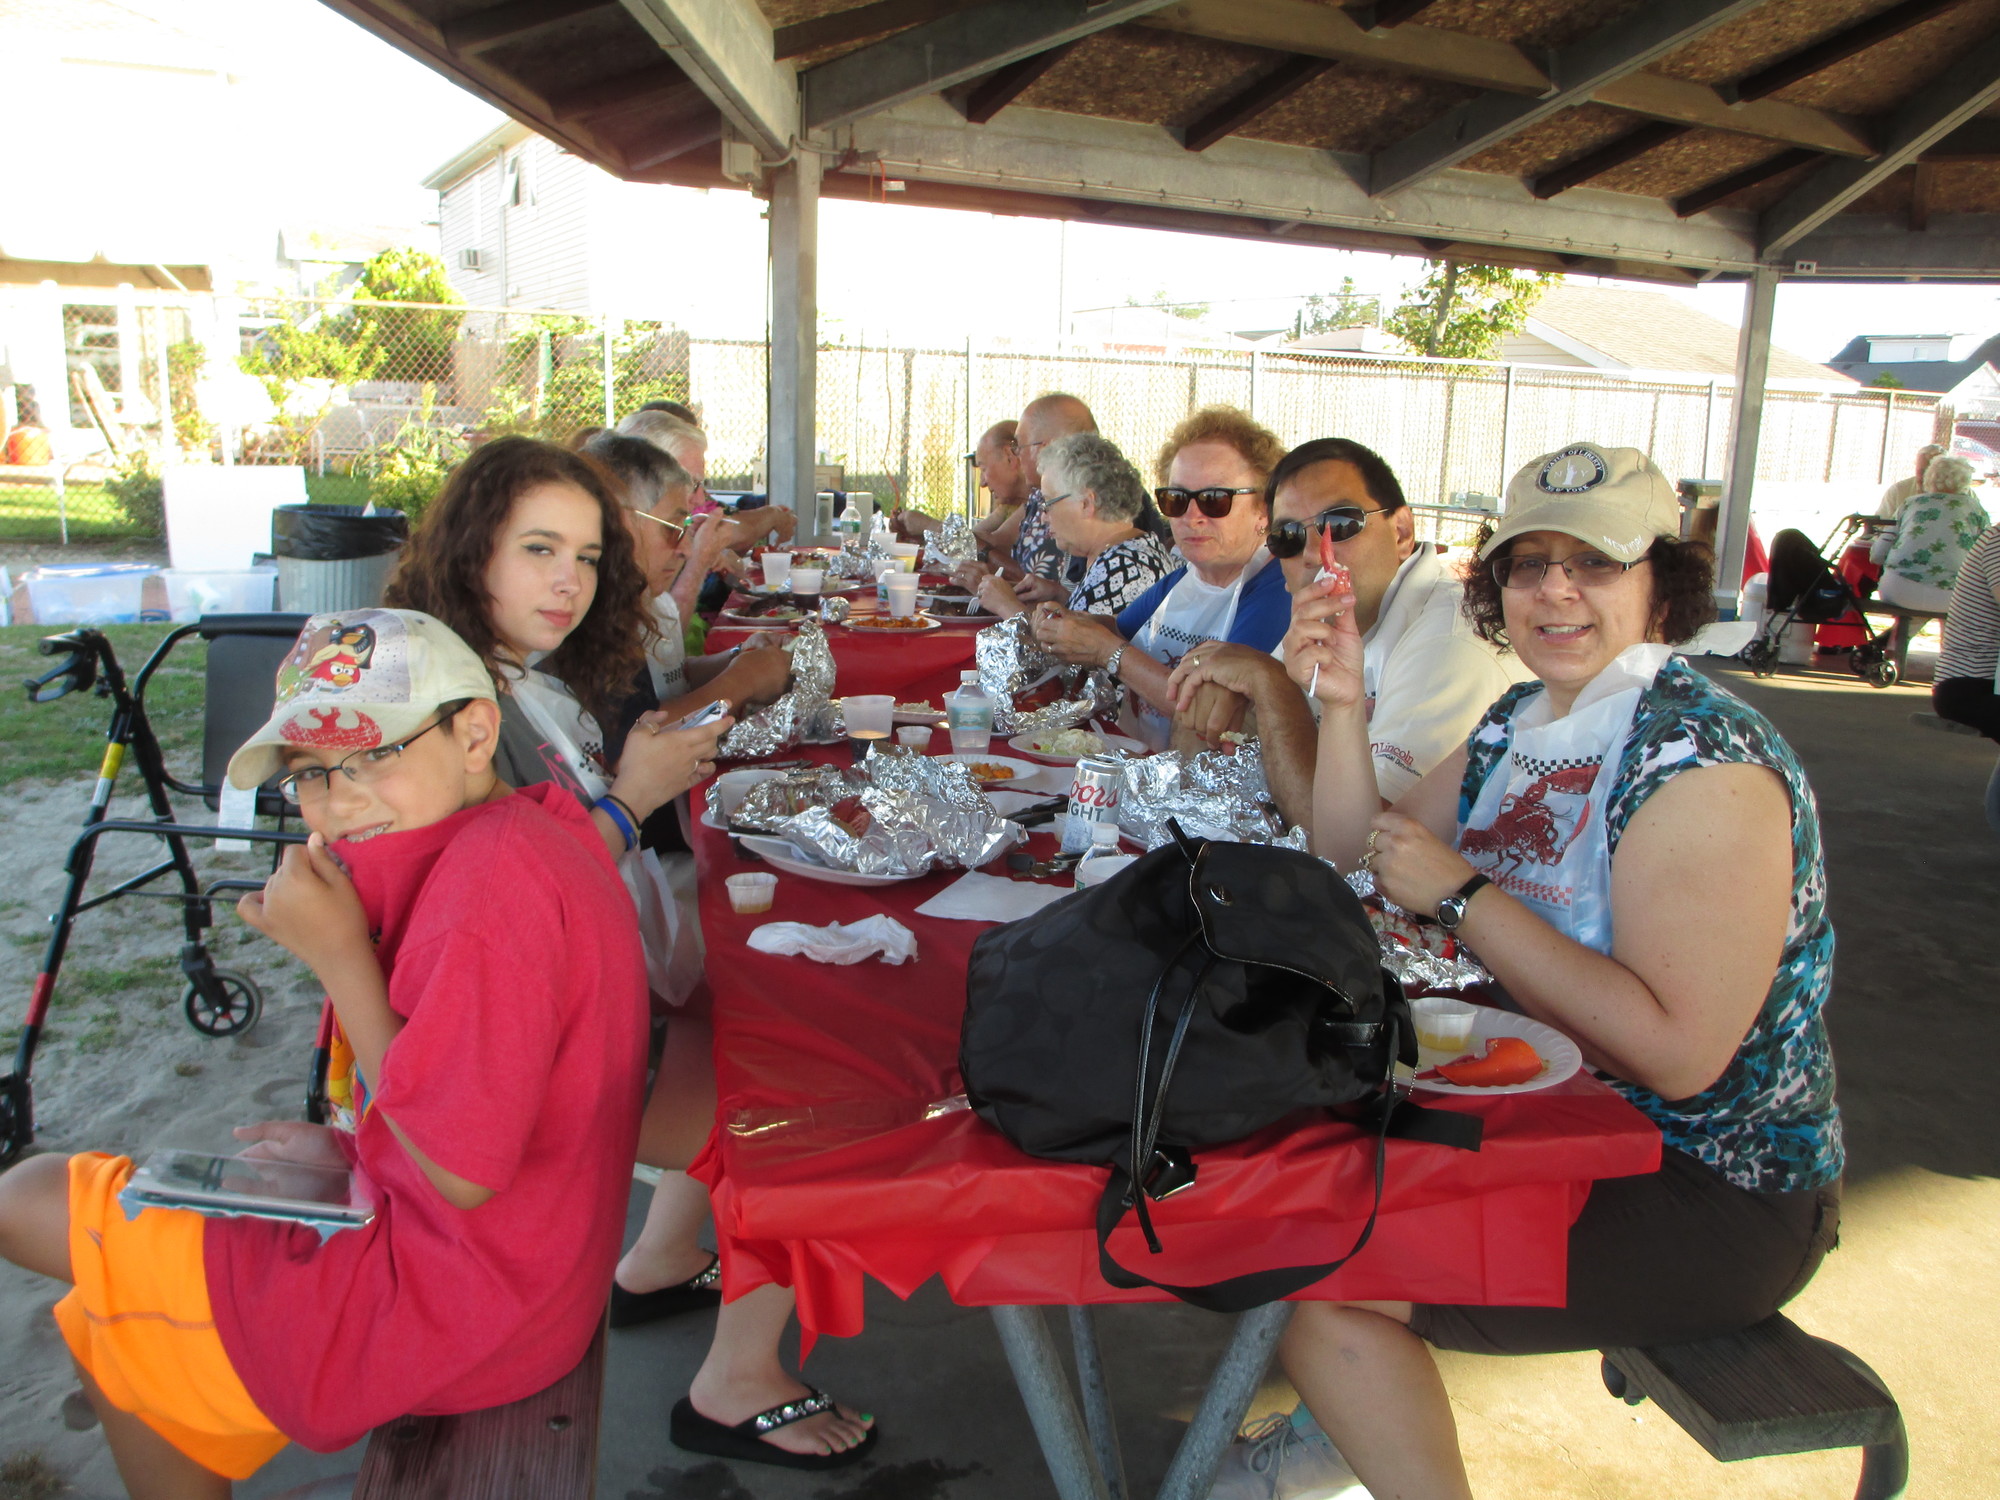 Members of 
several Kiwanis clubs in the Long Island Southwest Division enjoy the feast at the Island Park Kiwanis event.